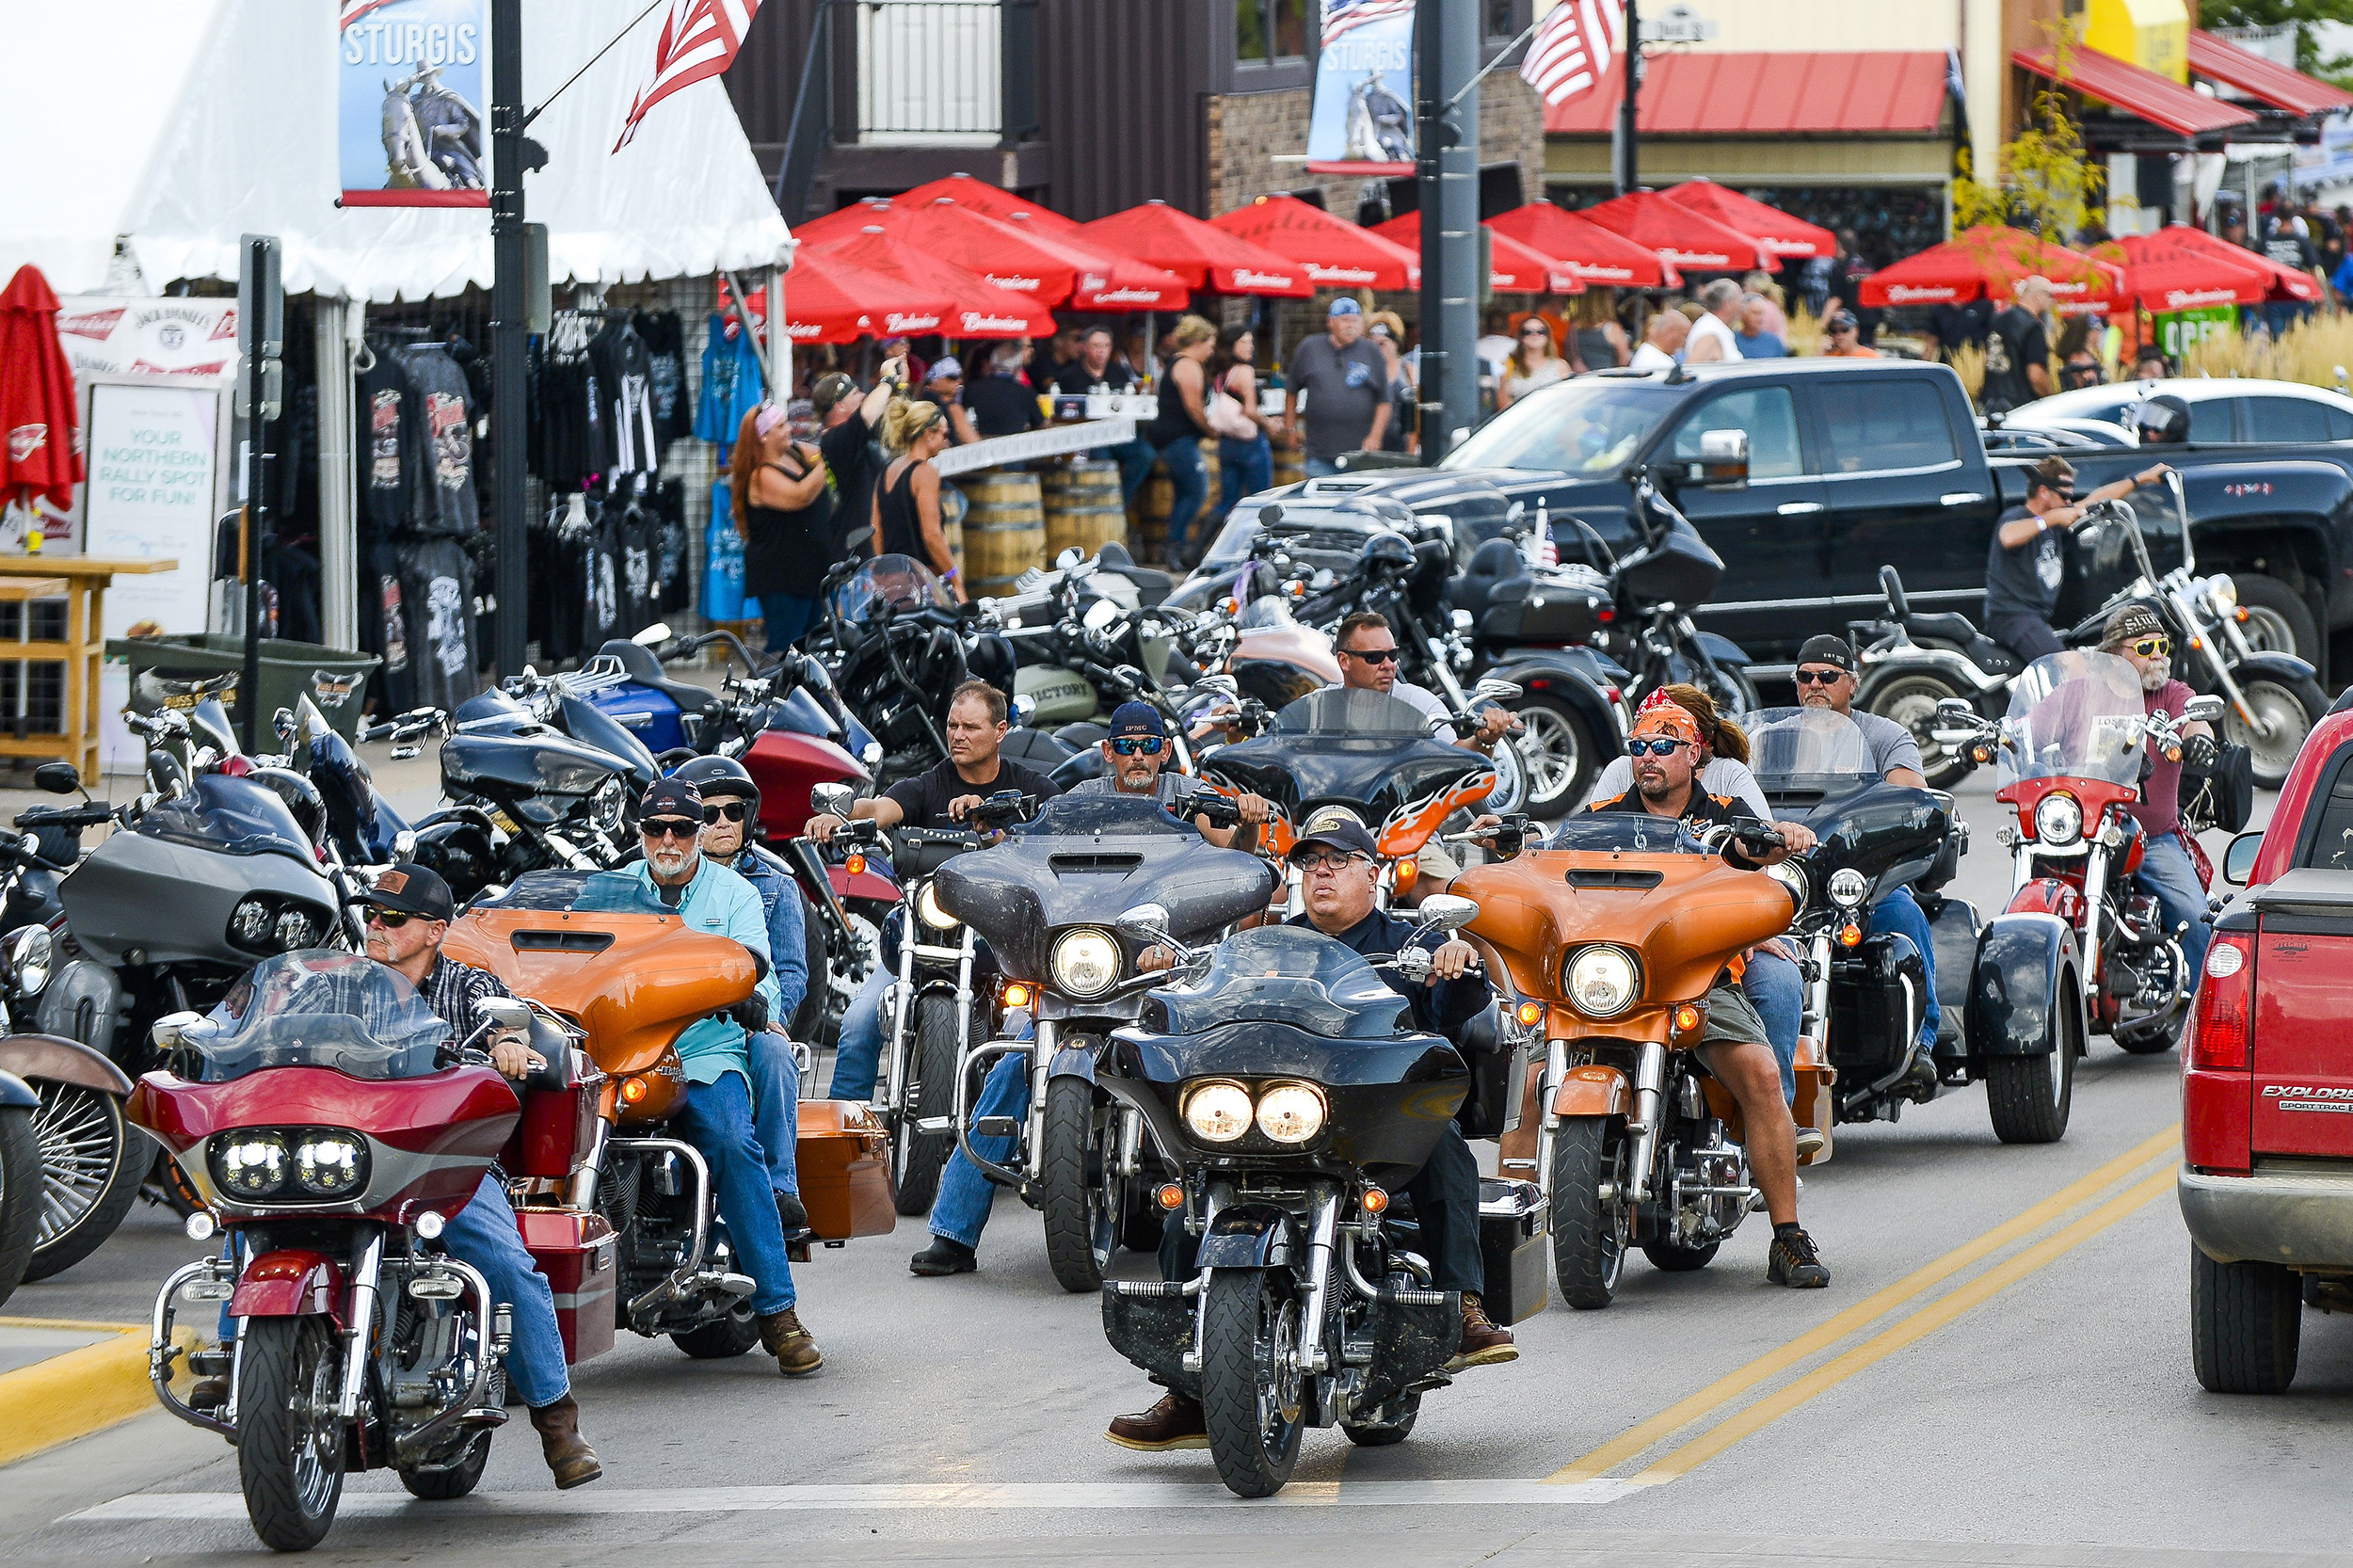 Here’s what we were told: An August motorcycle rally in Sturgis, ...